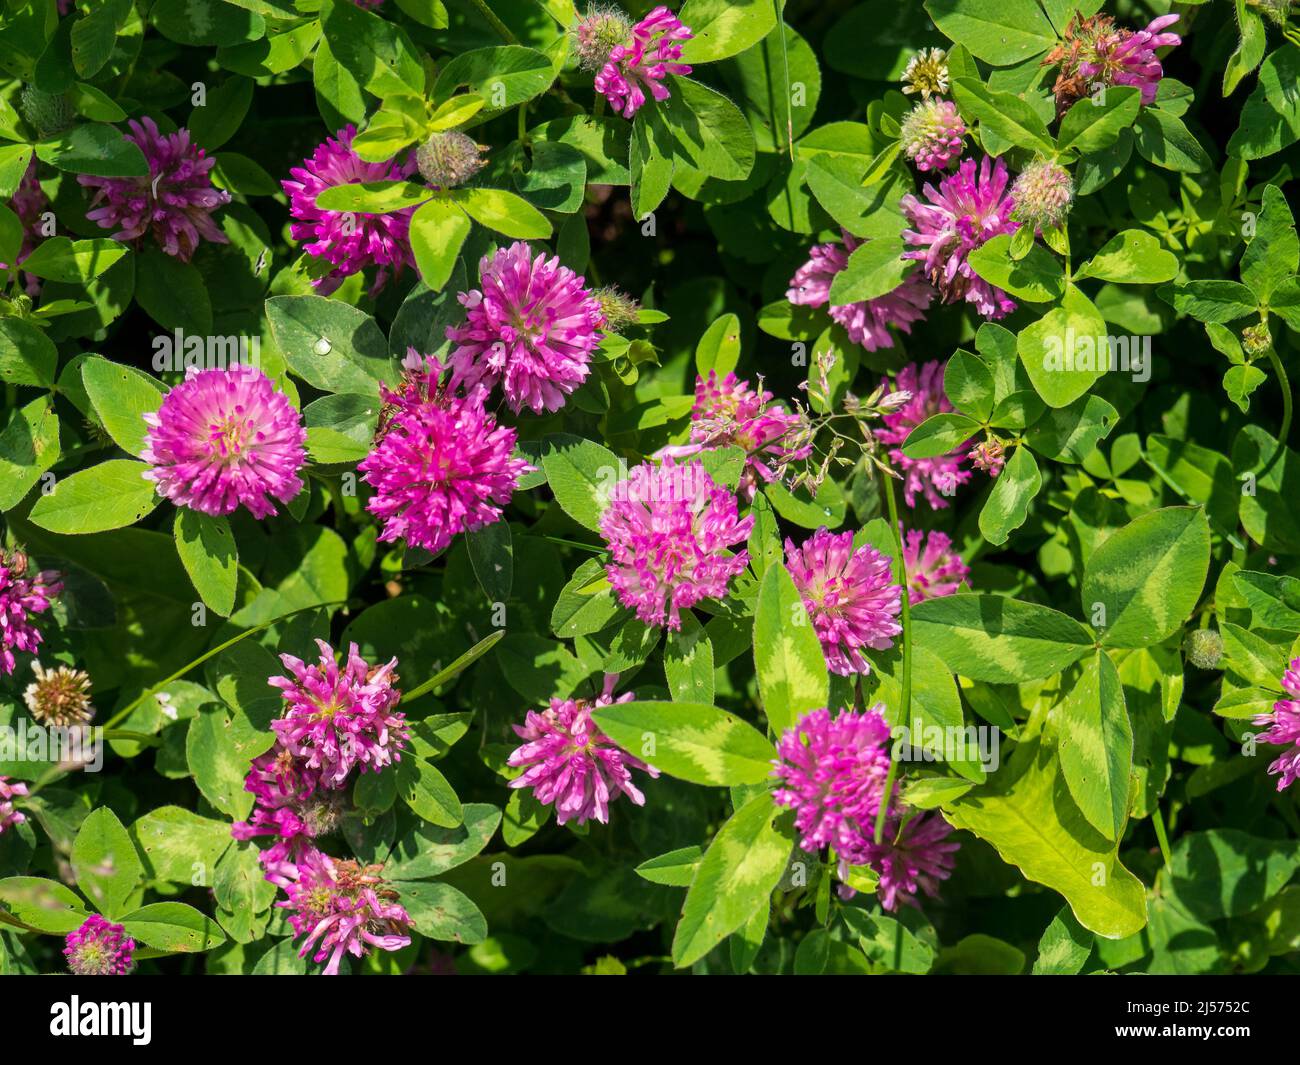 fresh pink flowers and green leaves of clover or trefoil Stock Photo